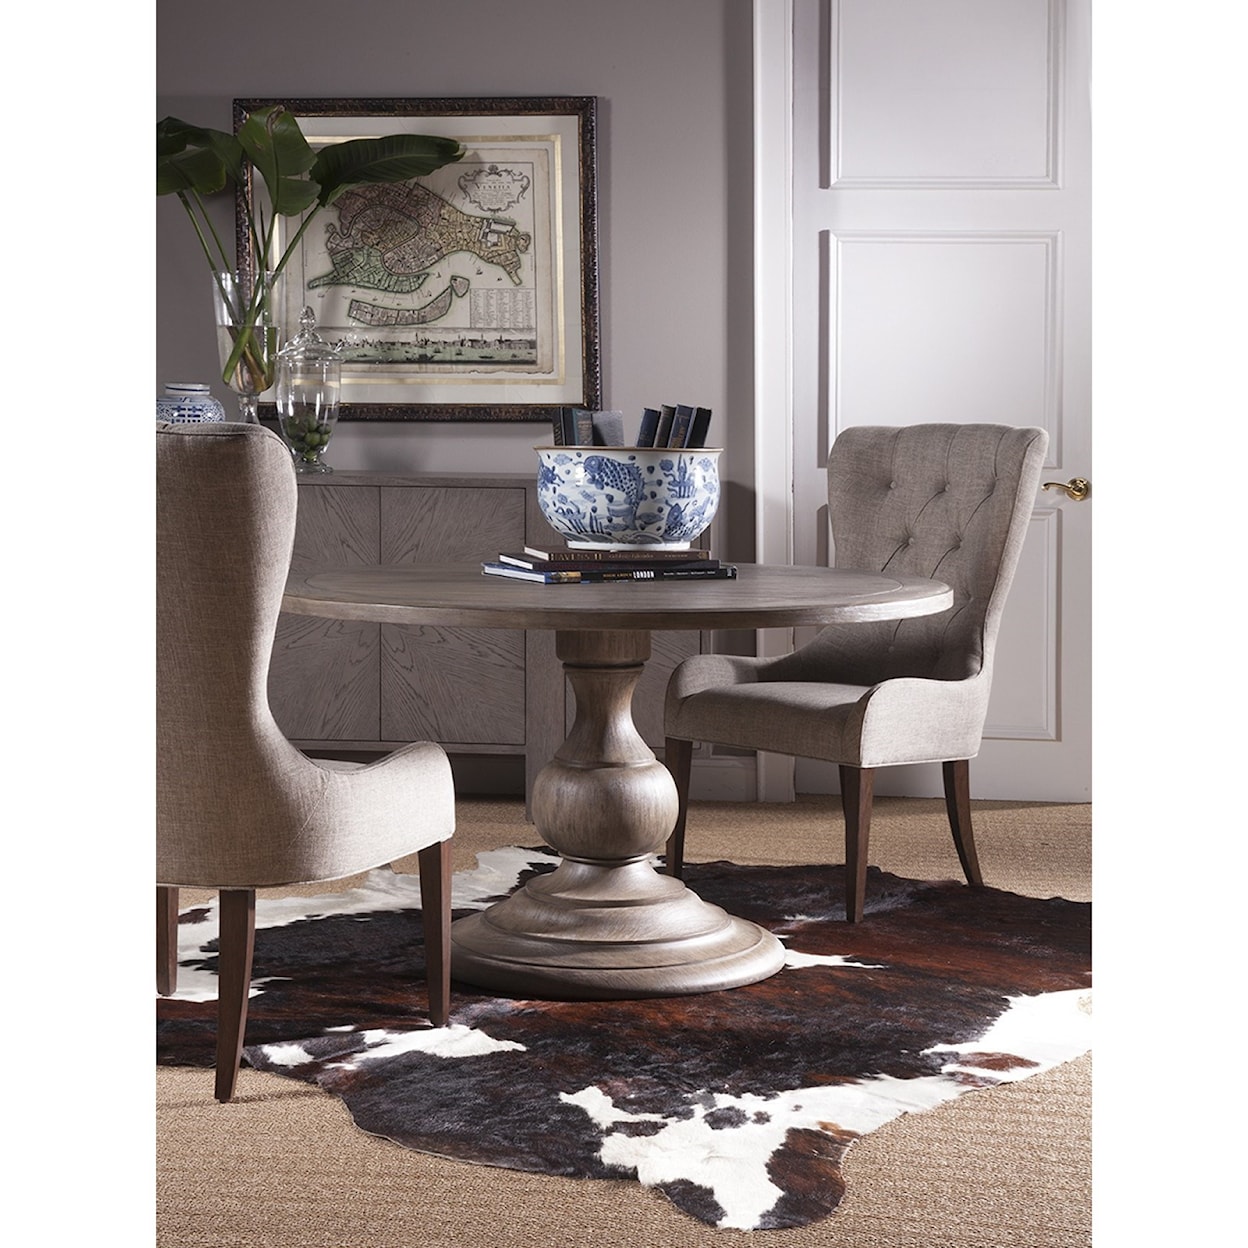 Artistica Cohesion Axiom Round Dining Table